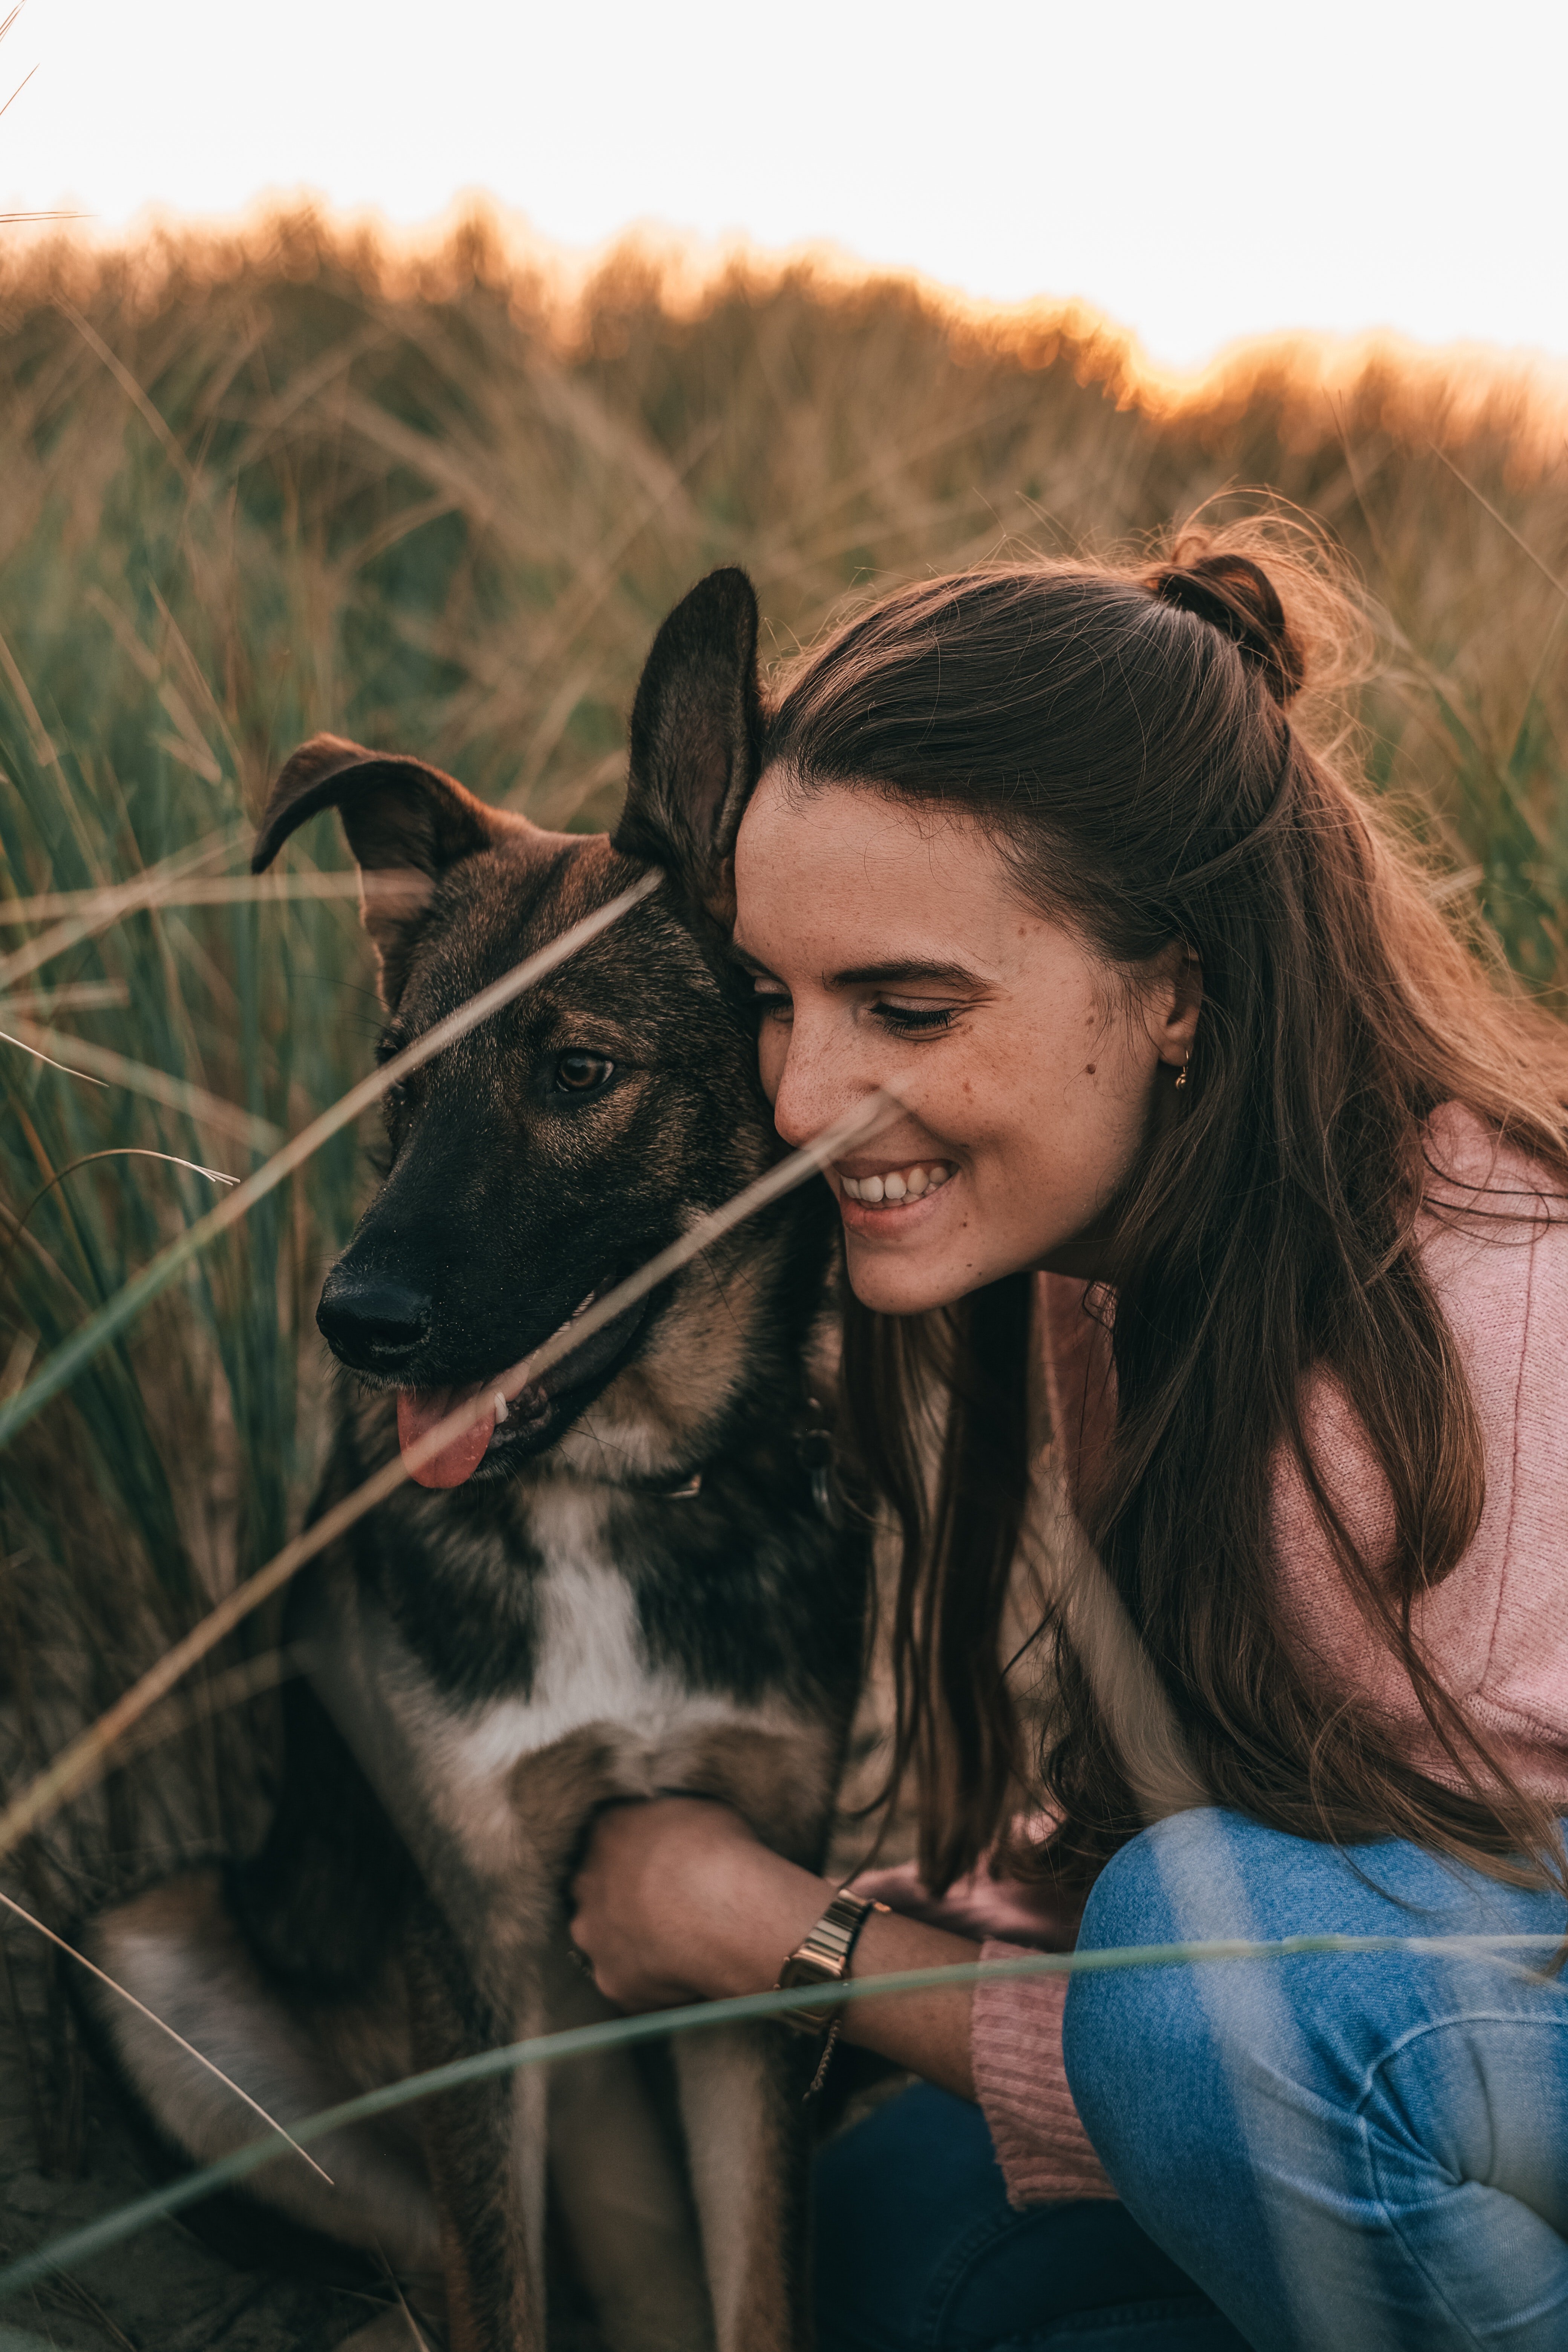 After Simon passed on, Annette decided to adopt Jesse | Source: Pexels